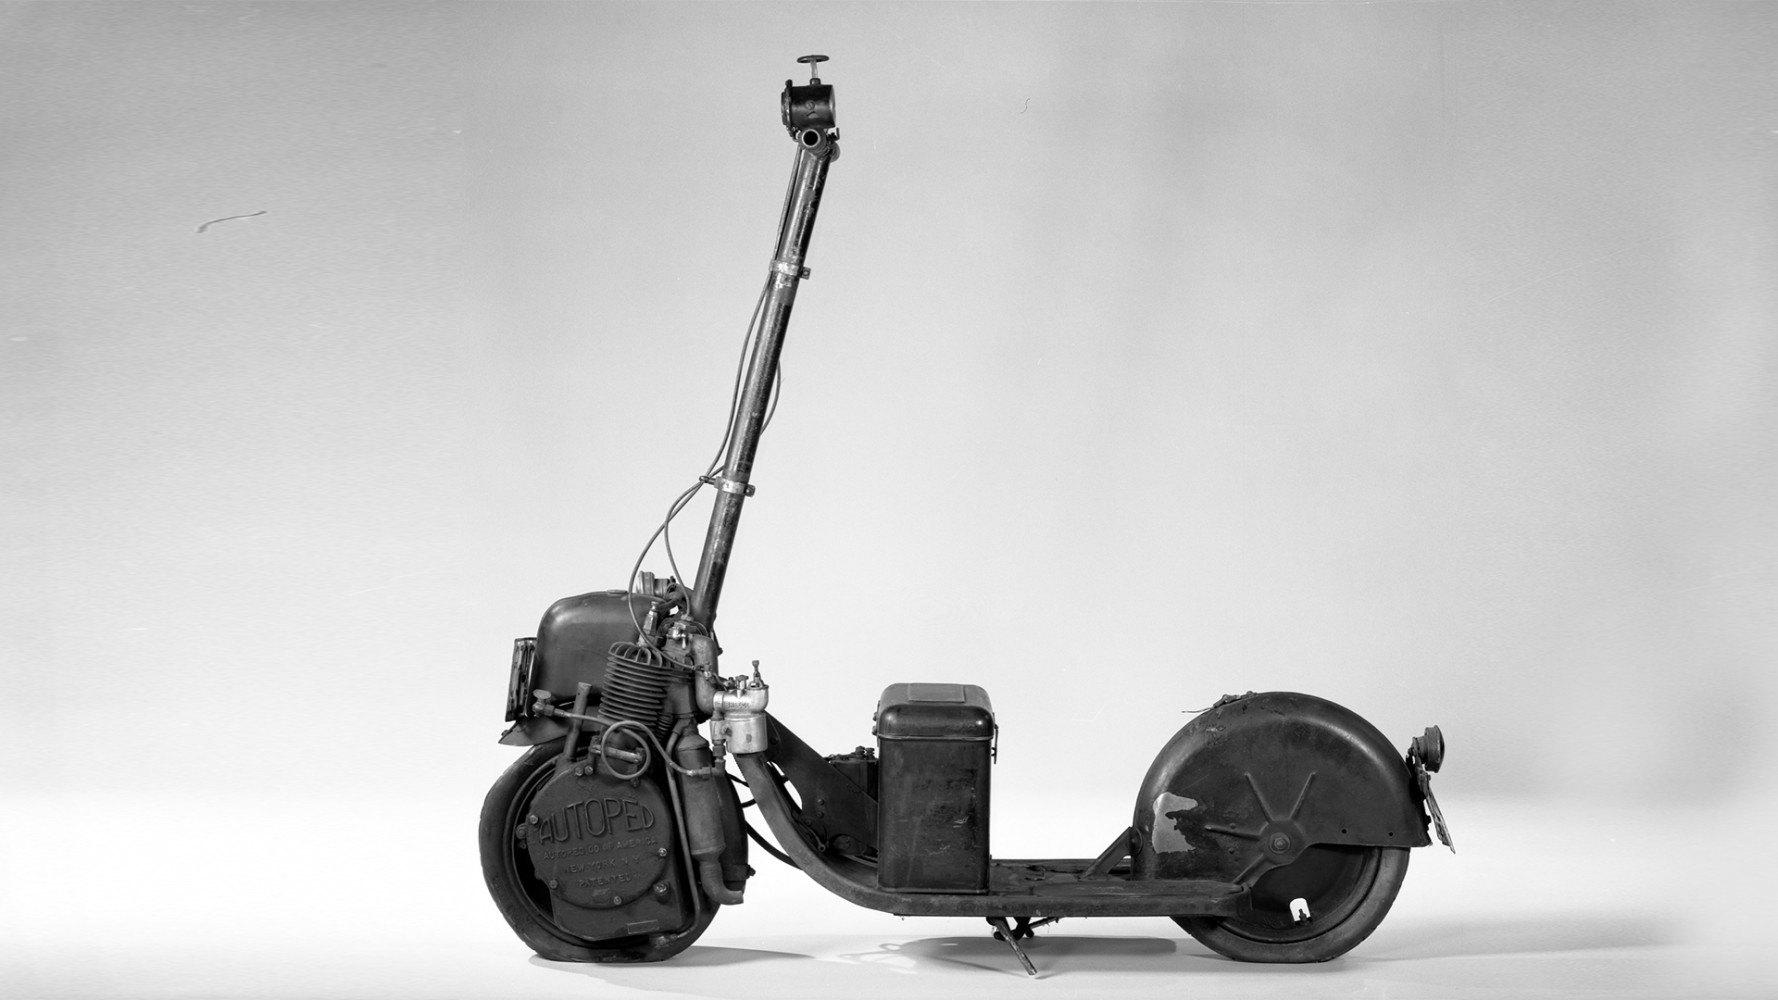 The Autoped Company of America, of Long Island City, New York, built this lightweight scooter in 1918. (Division of Work and Industry, National Museum of American History, Smithsonian Institution)